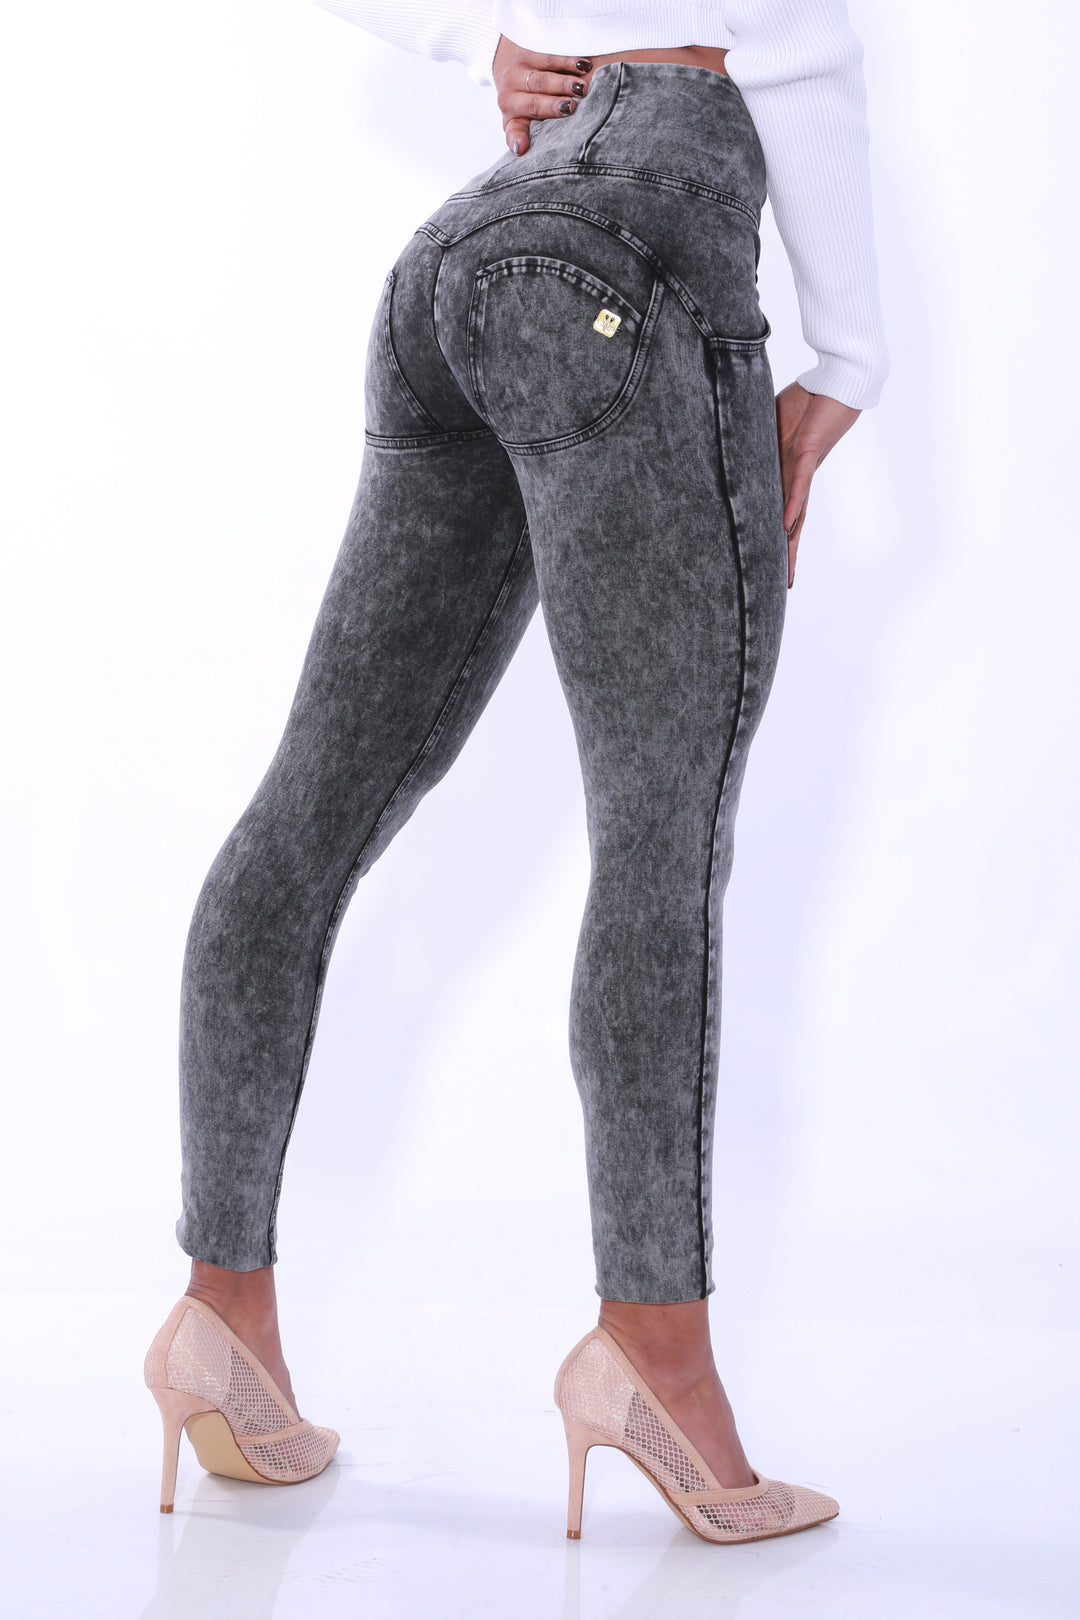 High waist Butt lifting Shaping jeans/Jeggings - Black Stoneaos-init aos-animate